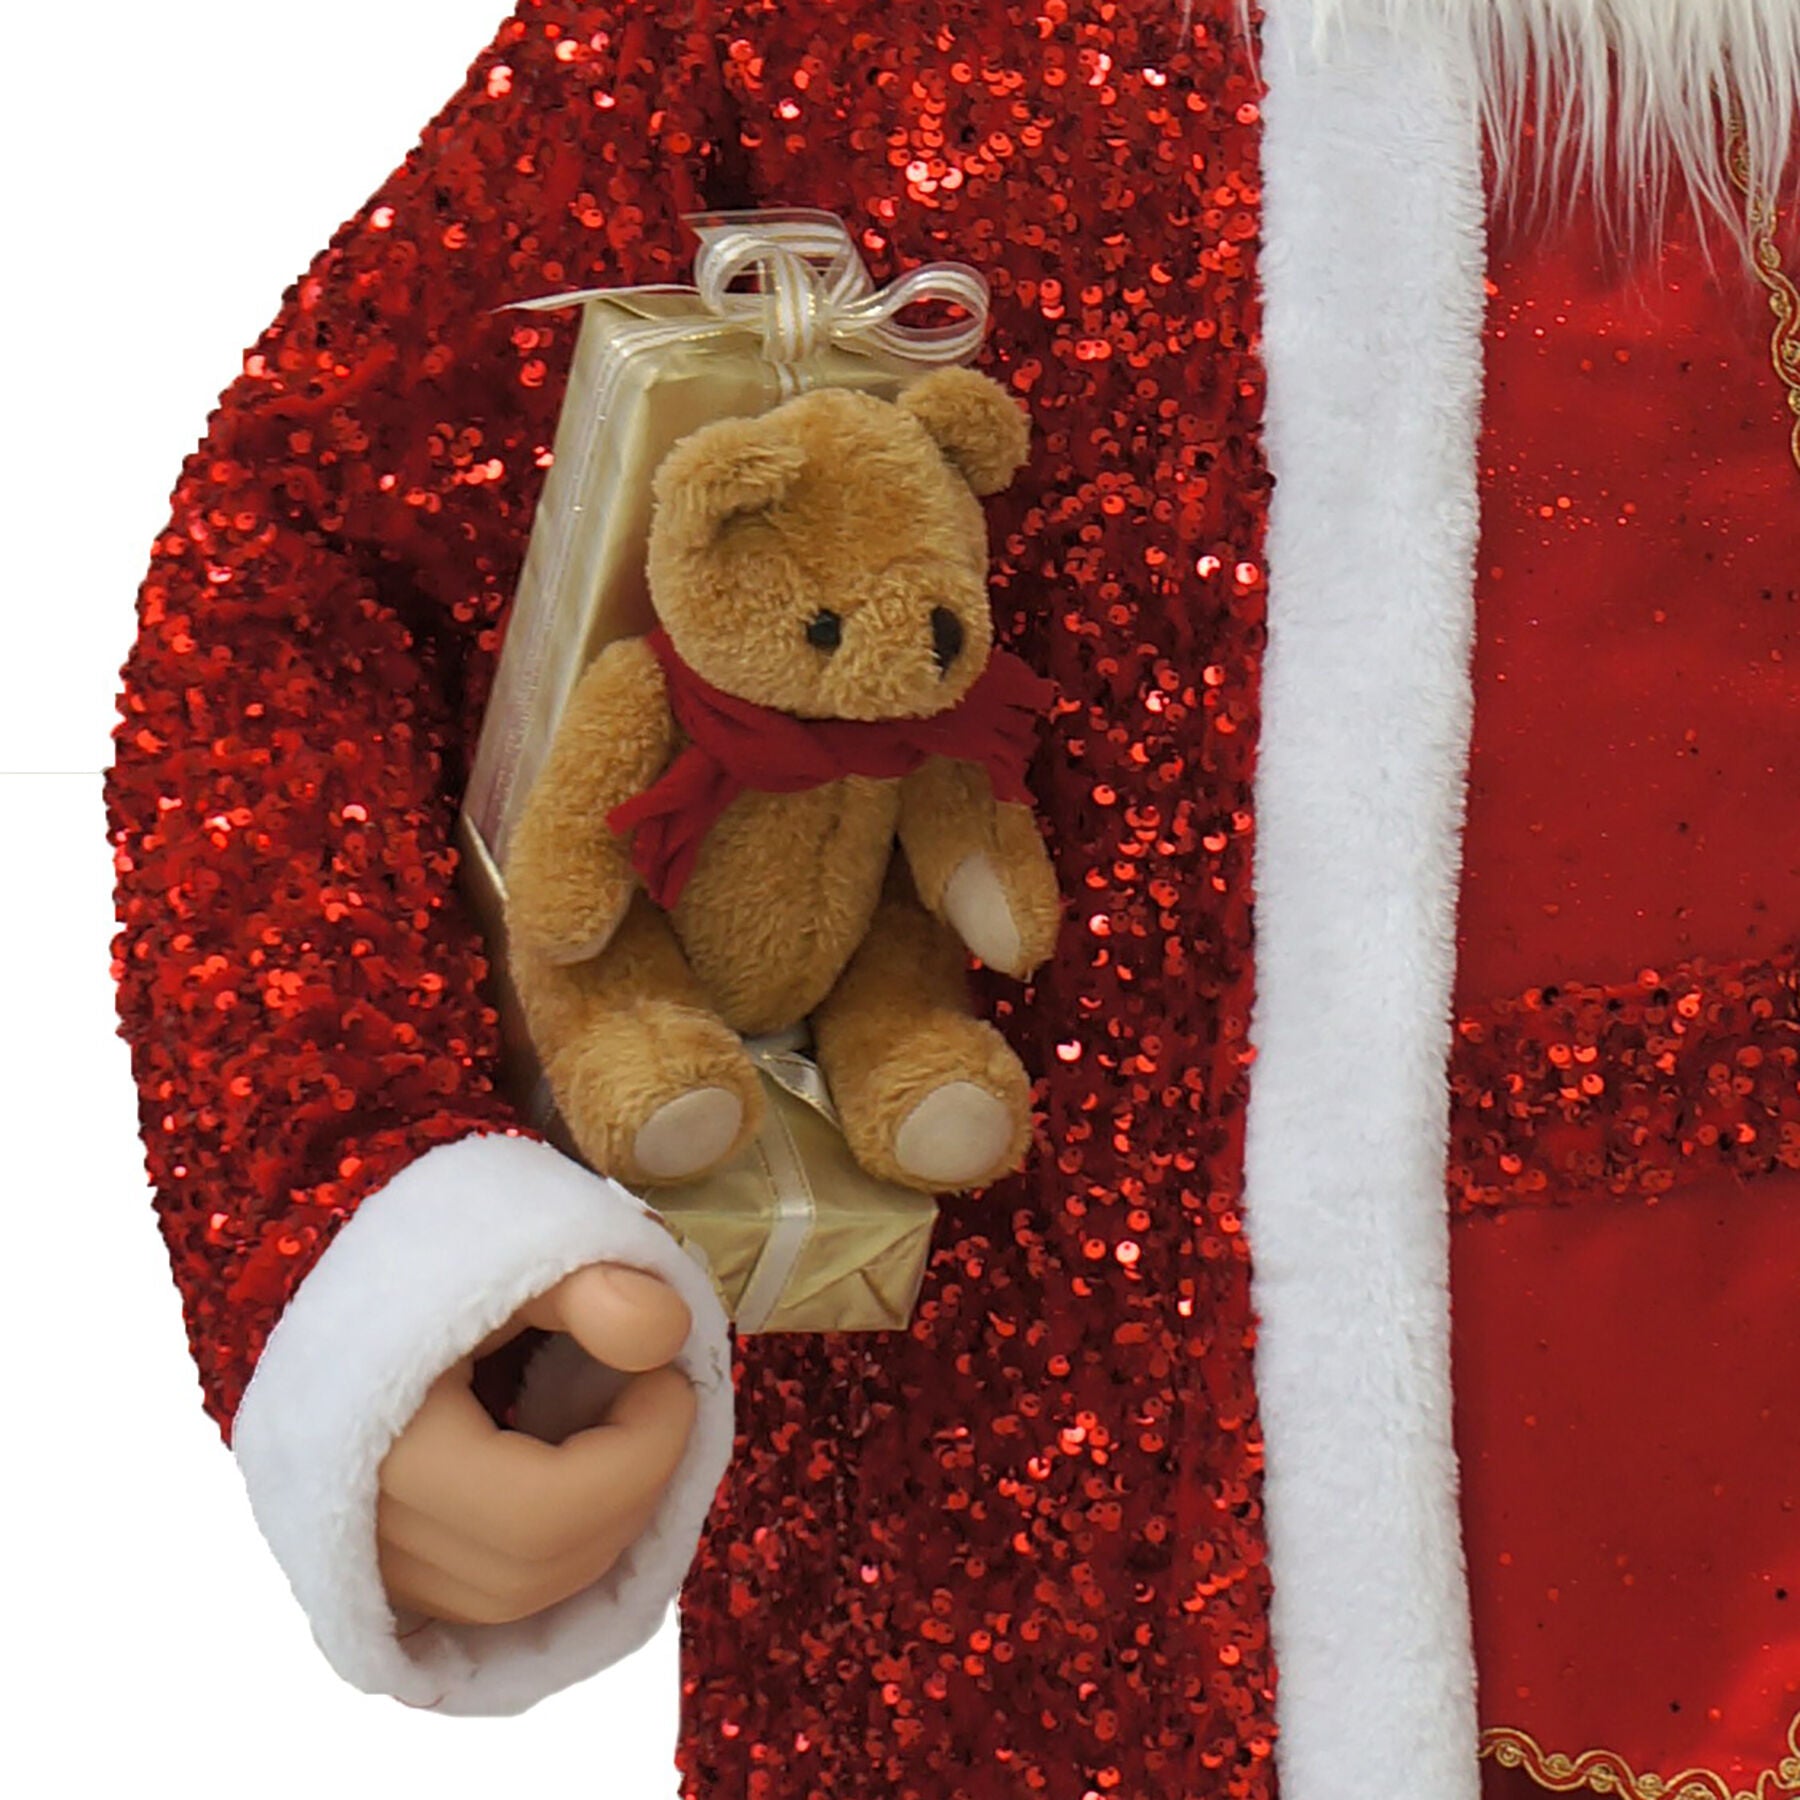 Fraser Hill Farm -  58-In. Dancing Santa in Red Sequin Suit with Teddy Bear and Wrapped Gifts, Life-Size Motion-Activated Christmas Animatronic